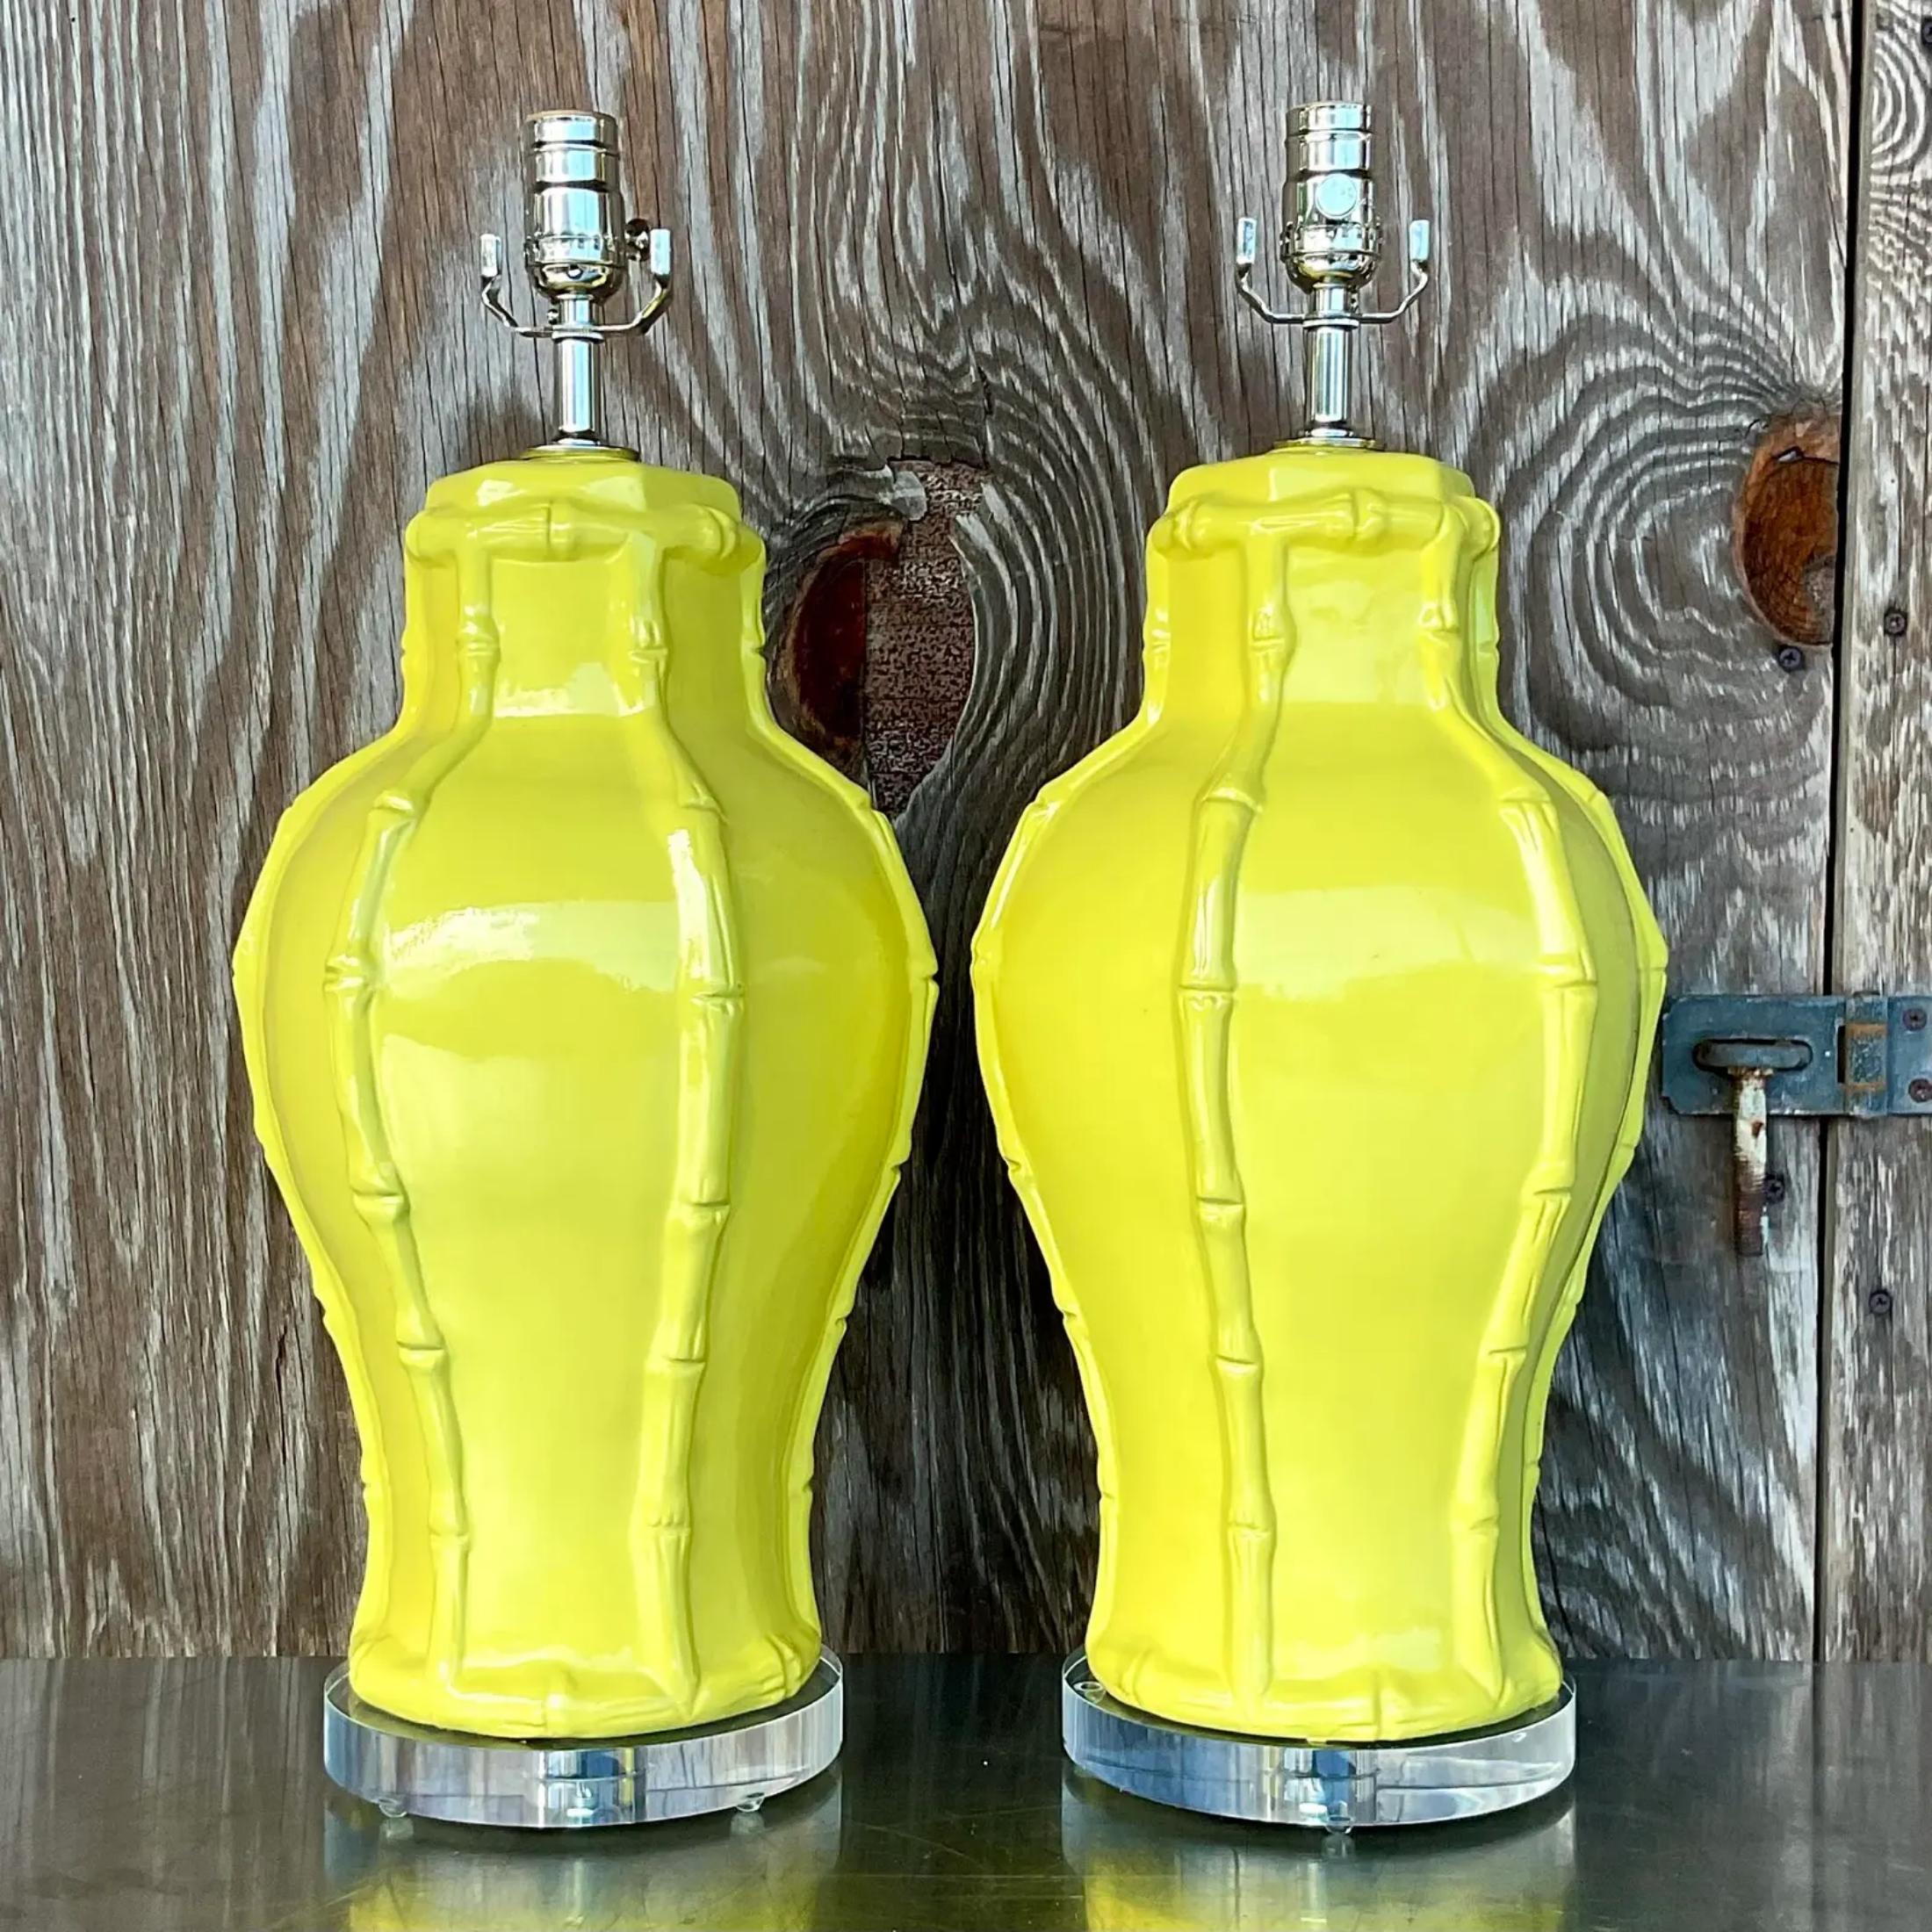 A fabulous pair of vintage Coastal table lamps. Beautiful Chartreuse color on a classic bamboo design. Fully restored with all new wiring, hardware and lucite plinths. Acquired from a Palm Beach estate. 